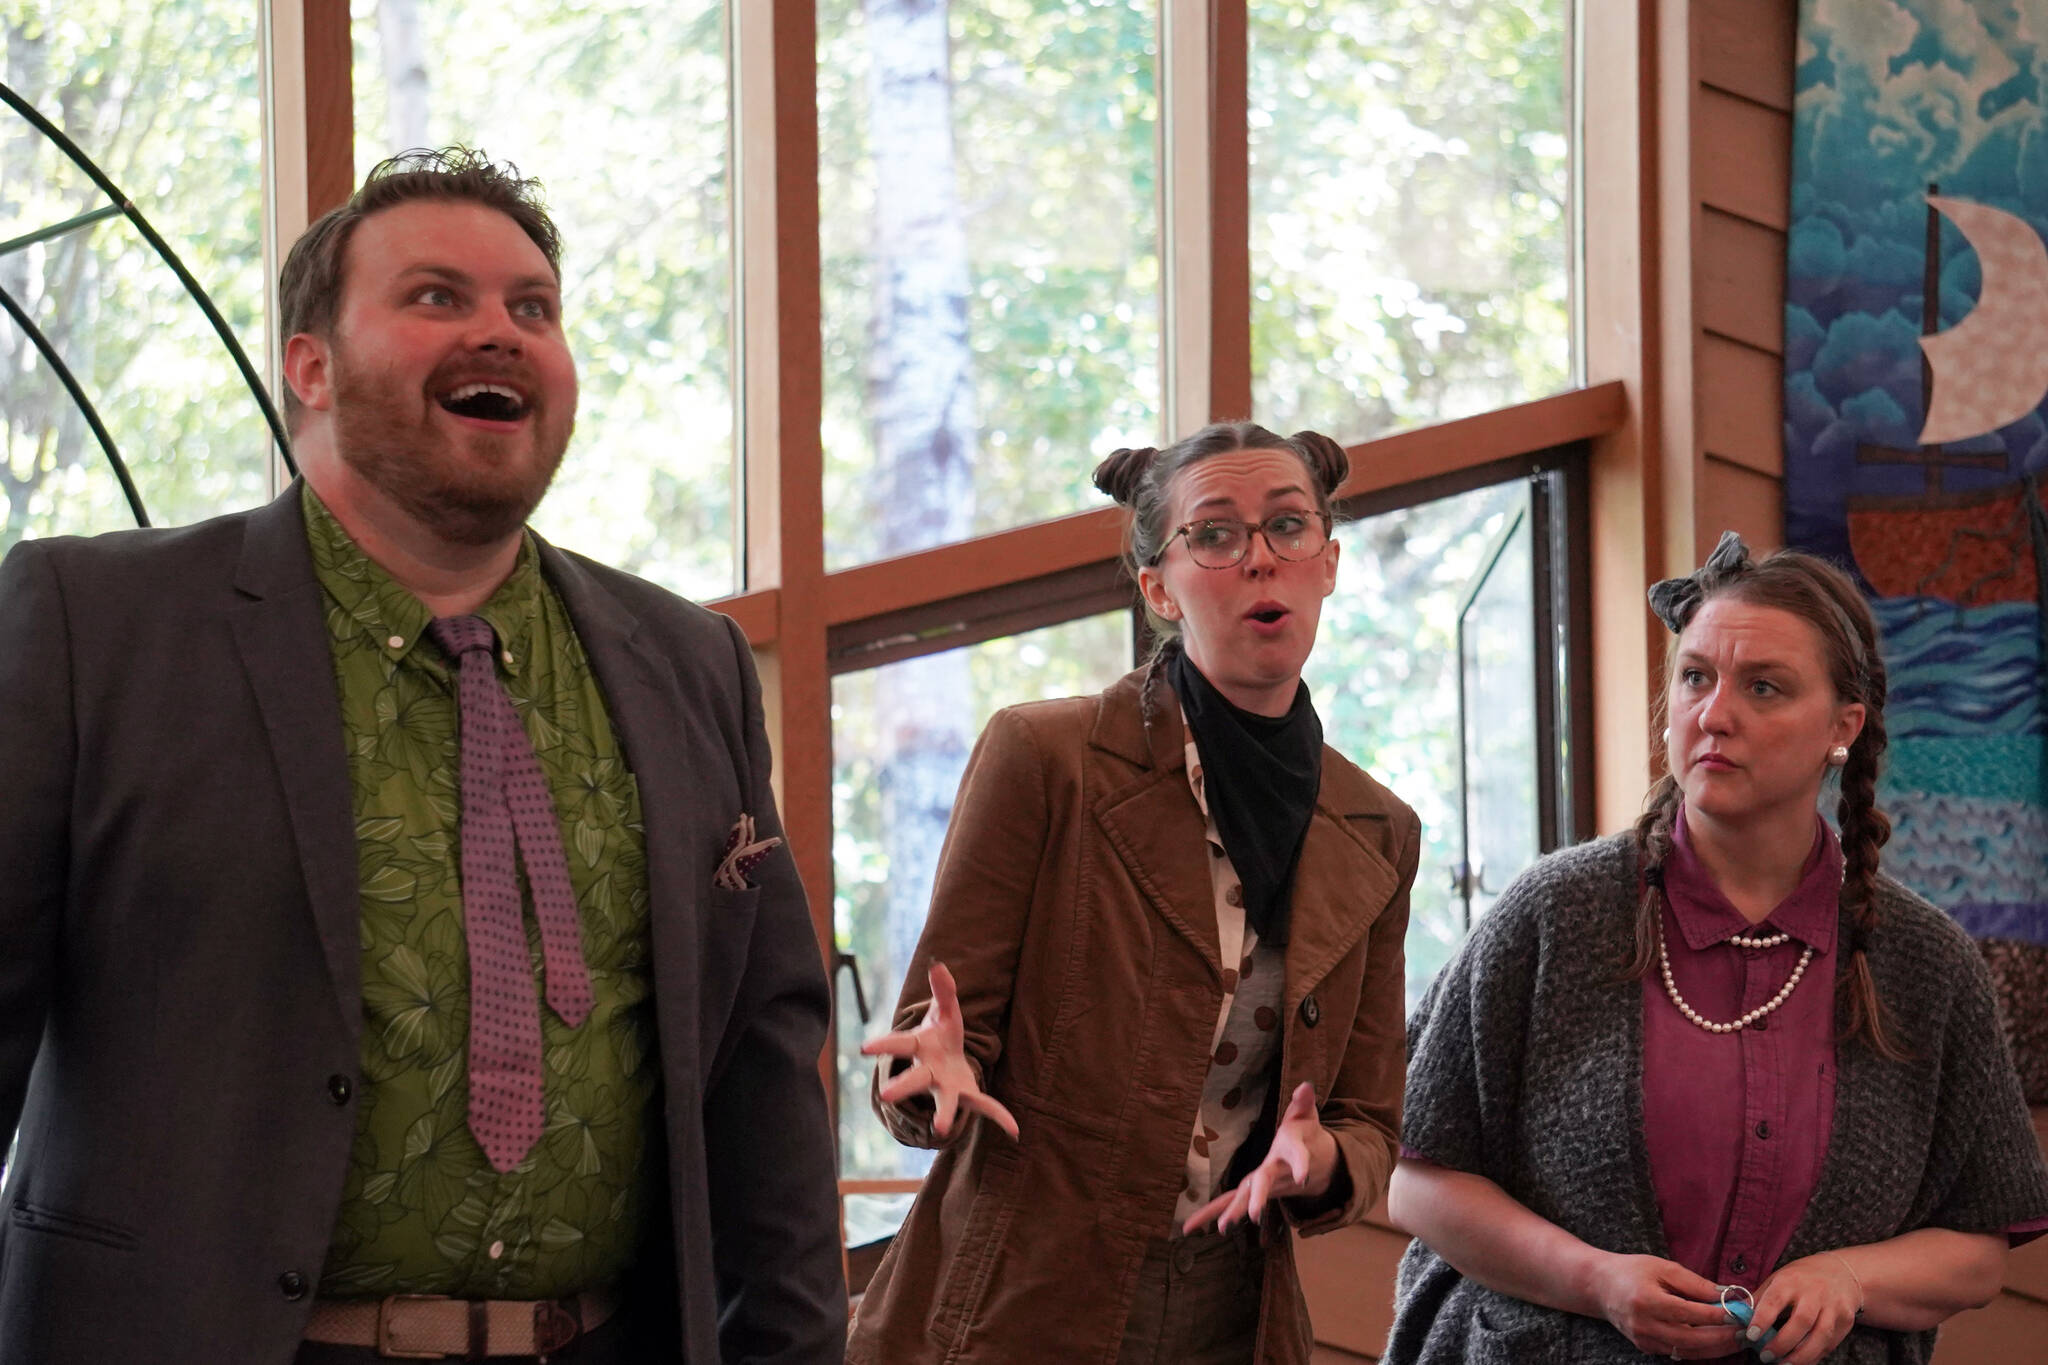 Joe Spady portrays Mr. Toad, Hayley Vest portrays Rat, and Tina Hamlin portrays Mole in a rehearsal for Treefort Theatre’s “The Wind in the Willows” at Christ Lutheran Church in Soldotna, Alaska, on Sunday, Aug. 13, 2023. (Jake Dye/Peninsula Clarion)